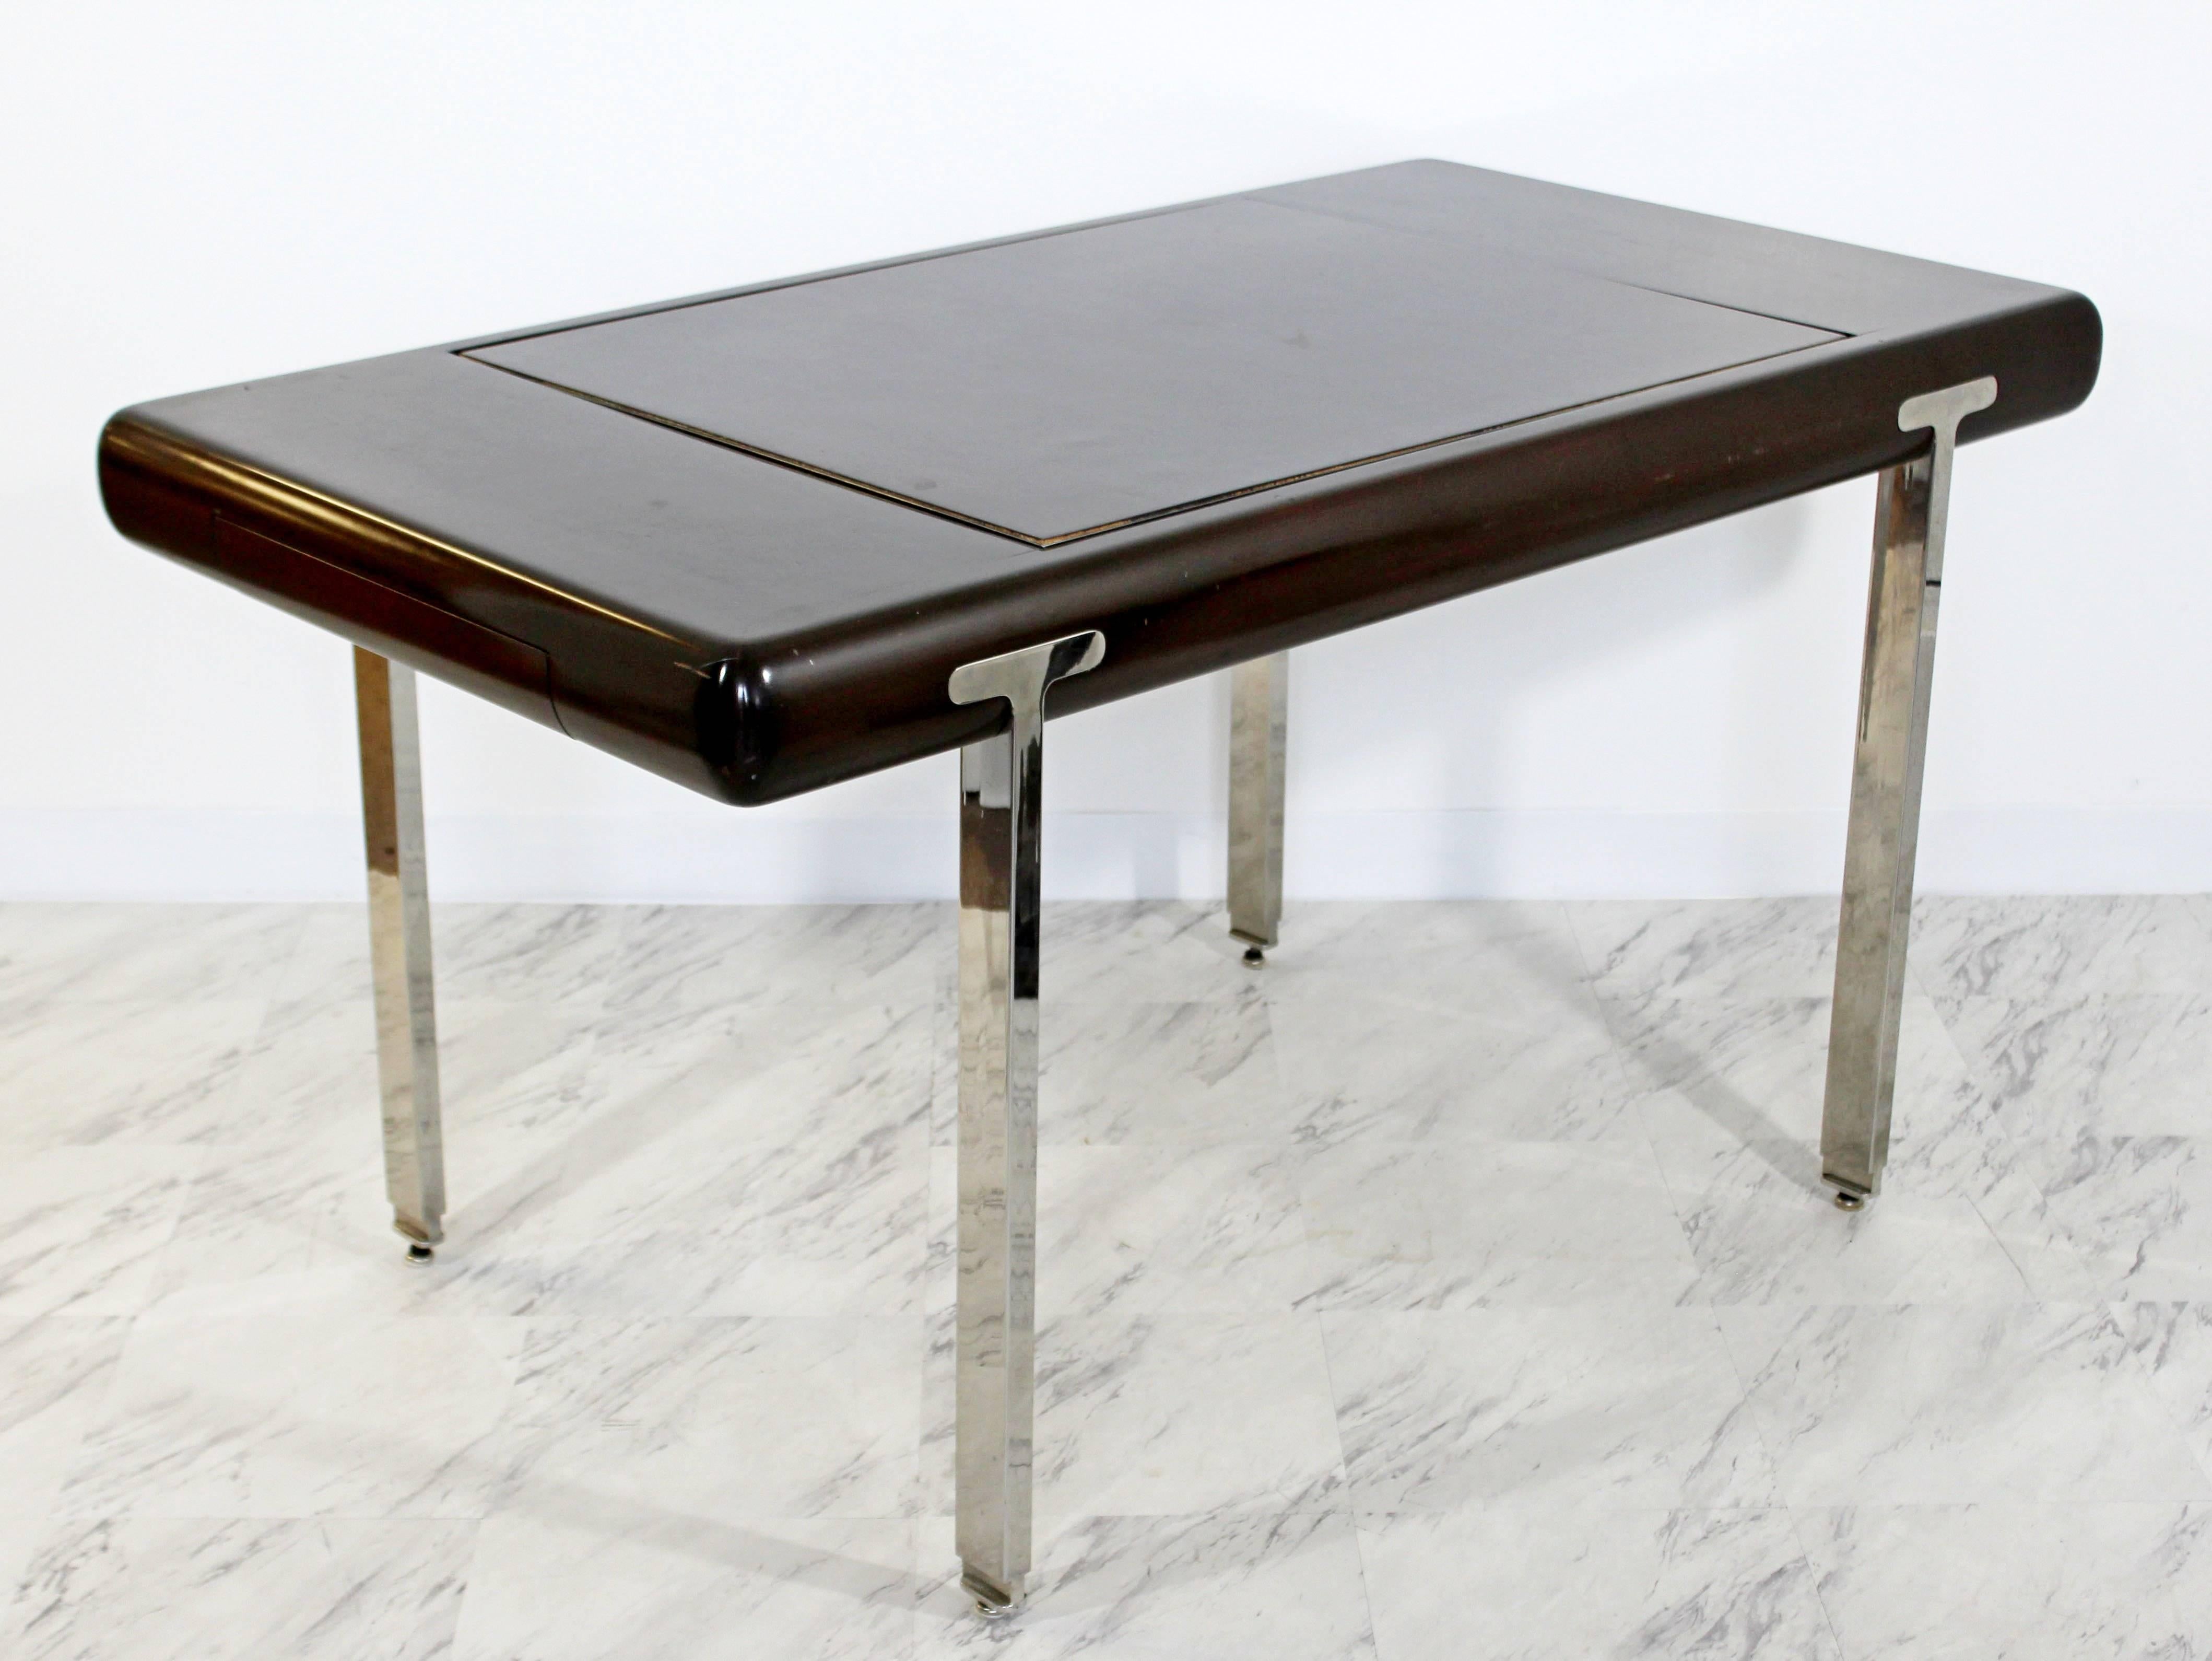 Late 20th Century Mid-Century Modern Chrome and Wood Desk Backgammon Game Table 1970s Pace Brueton